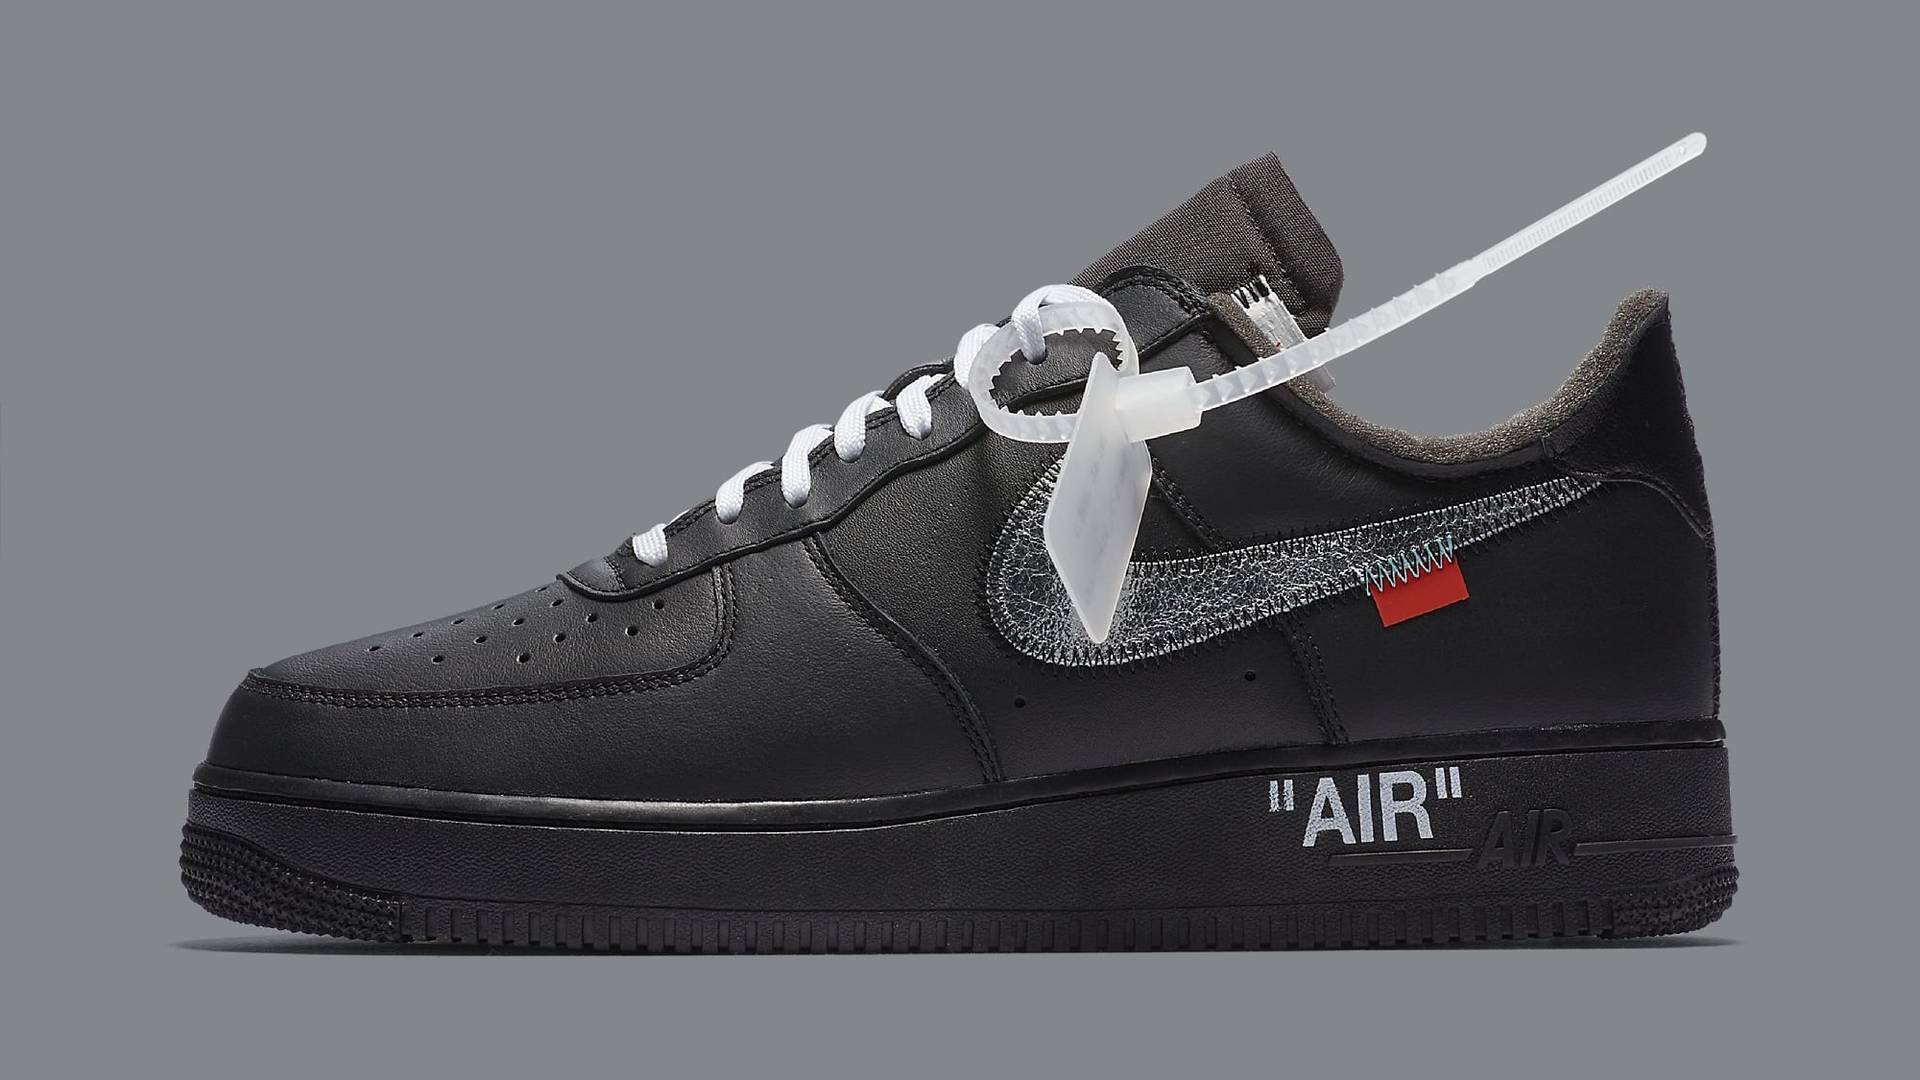 Off White X Nike AF1 Low MoMa Image Surface, Sparking Release